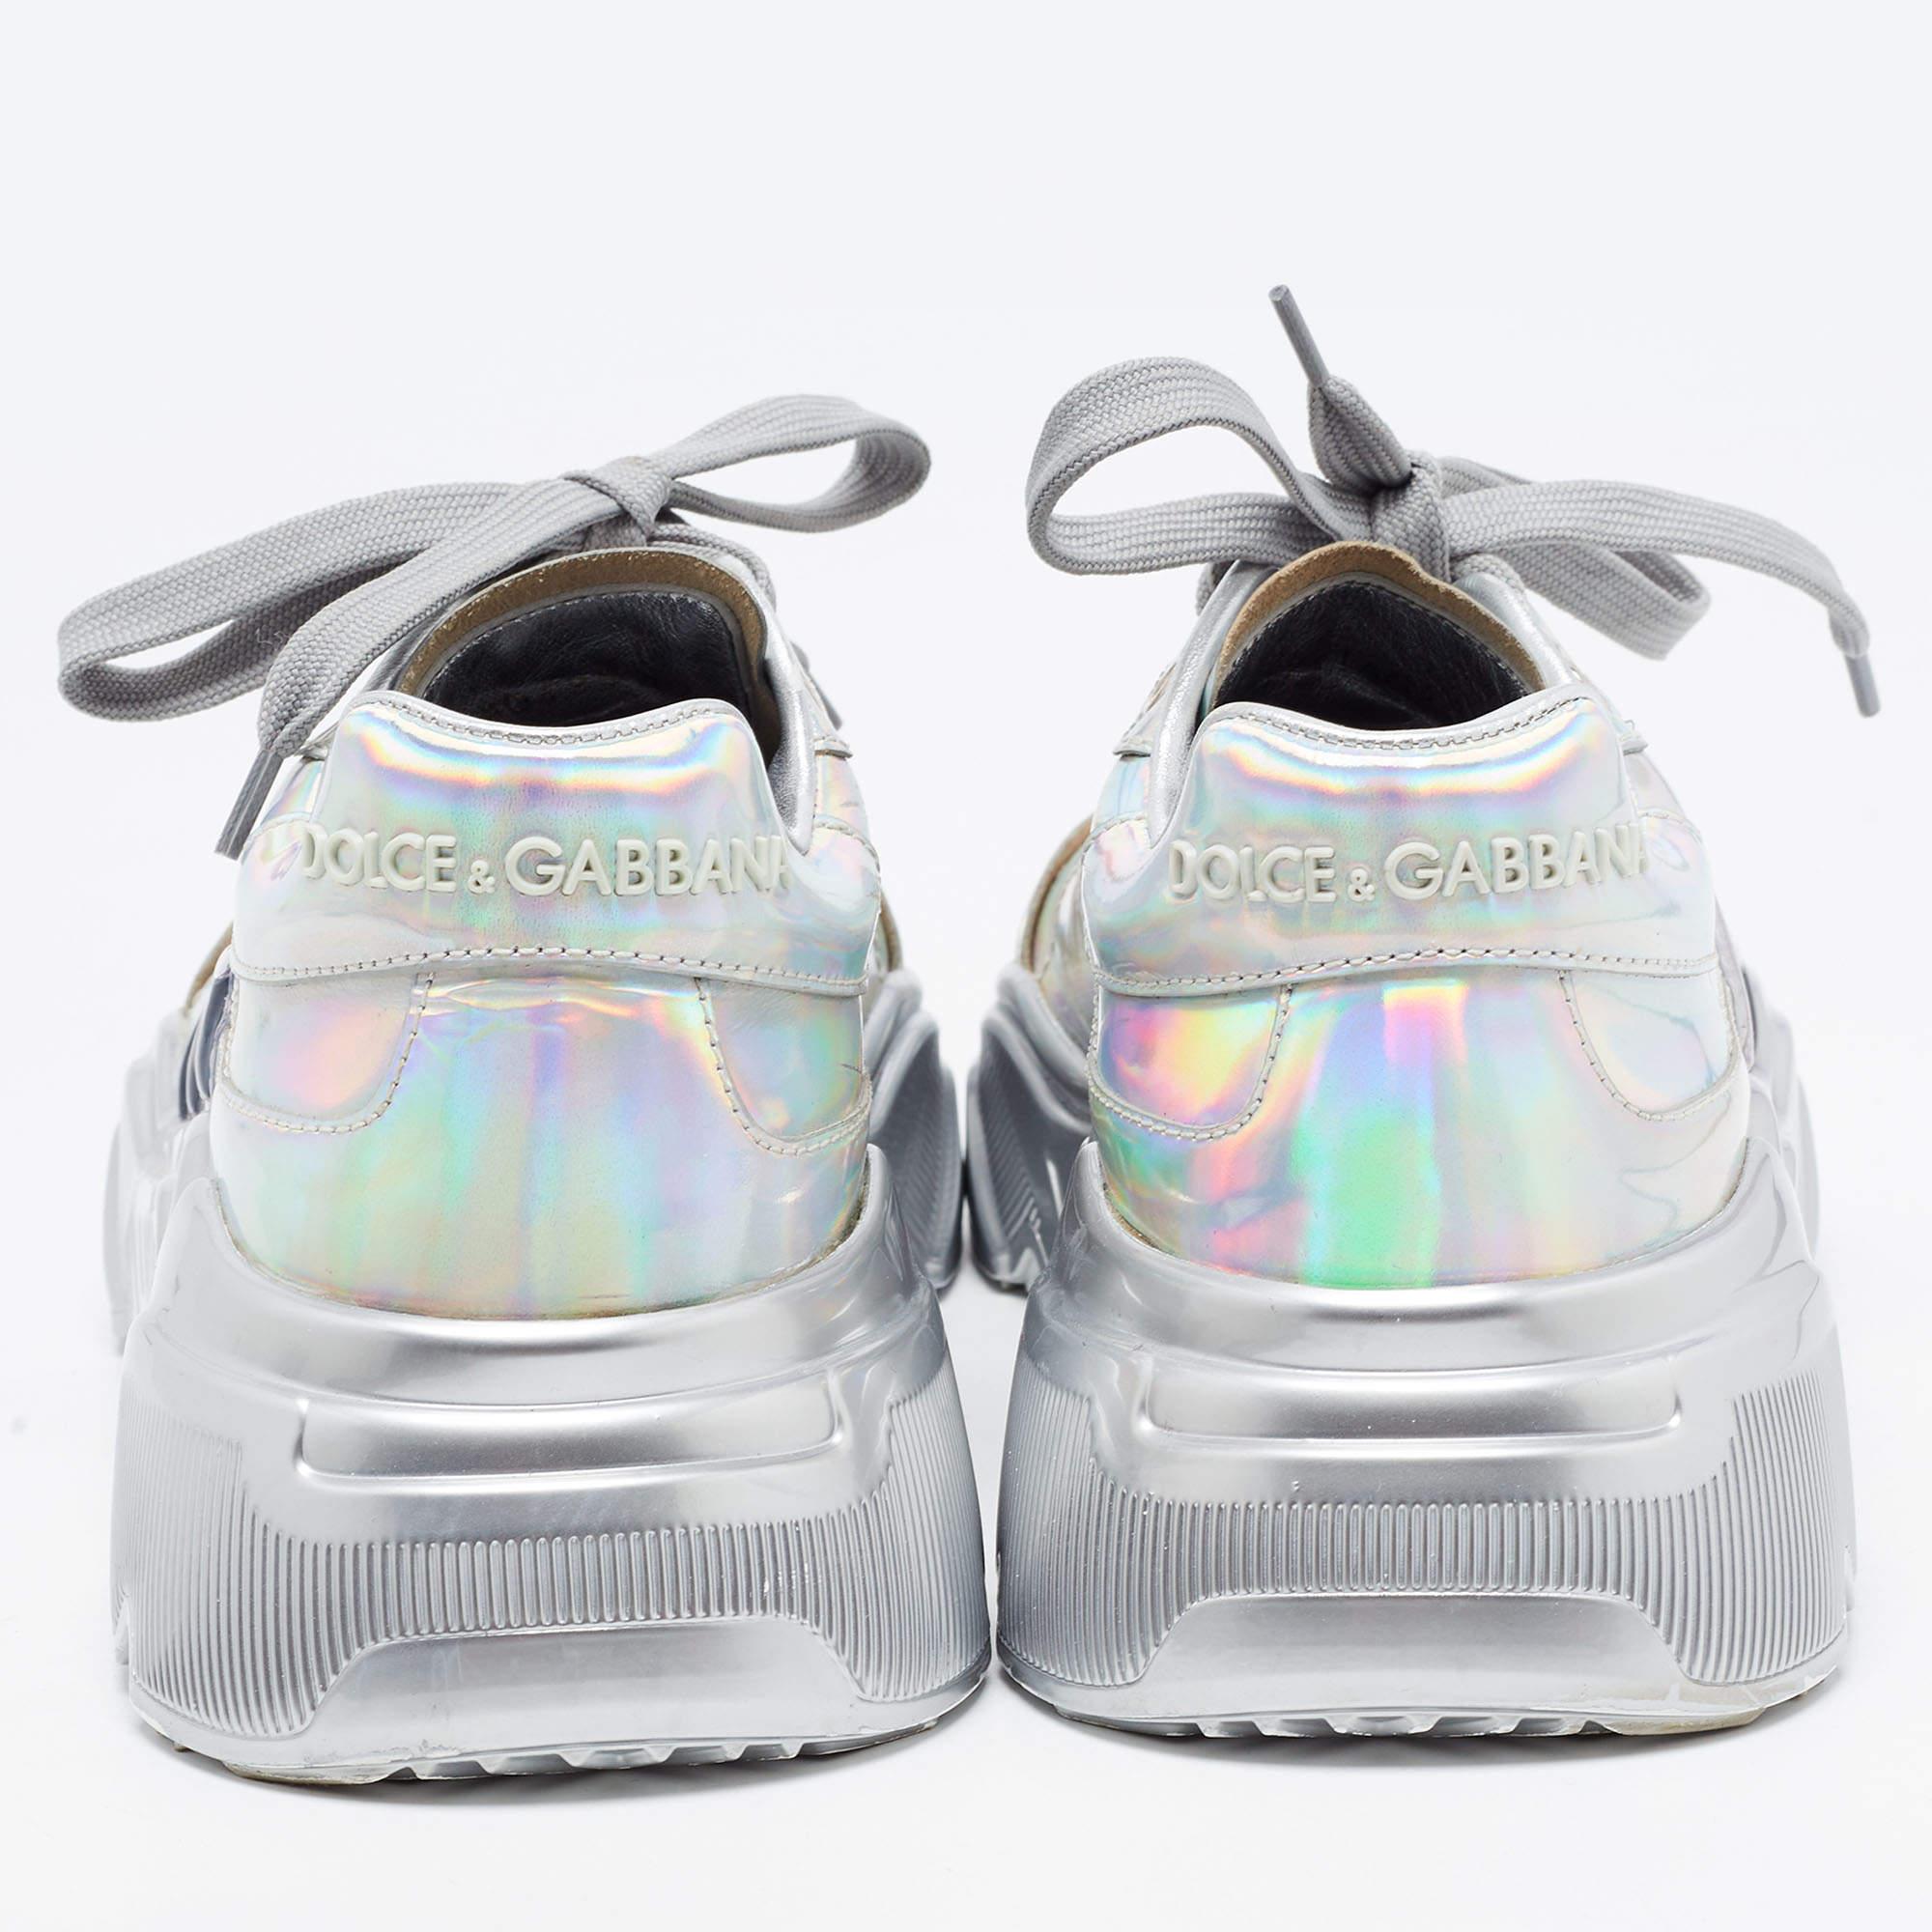 Dolce and Gabbana Silver Iridescent Leather Daymaster Sneakers Size 37 2